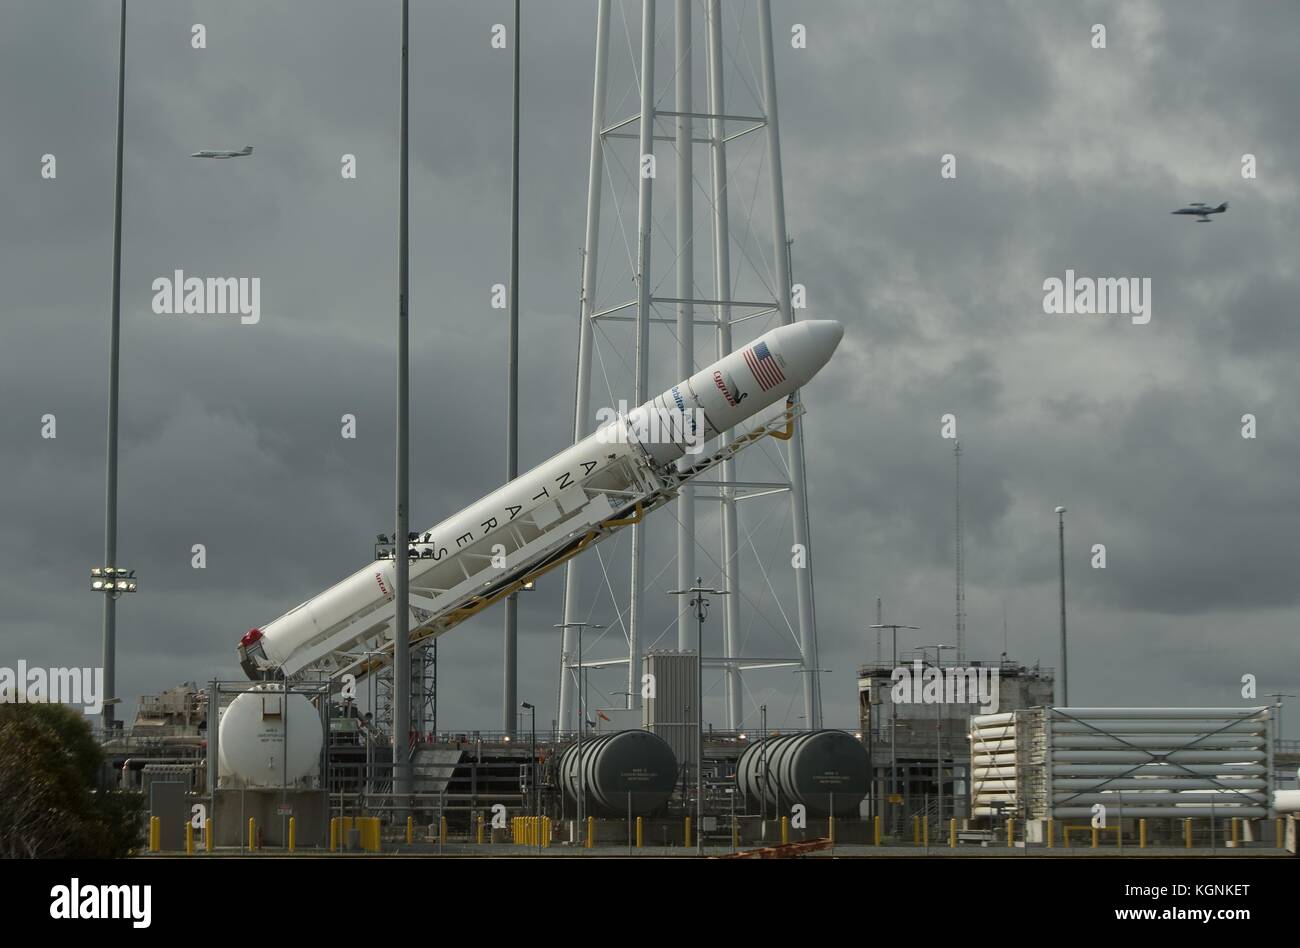 Wattsville, Virginia, USA. 09th Nov, 2017. The Orbital ATK Antares rocket is raised into the vertical position on launch Pad-0A at Wallops Flight Facility November 9, 2017 in Wattsville, Virginia. The rocket will carry over 7,400 pounds of supplies to the International Space Station. Credit: Planetpix/Alamy Live News Stock Photo